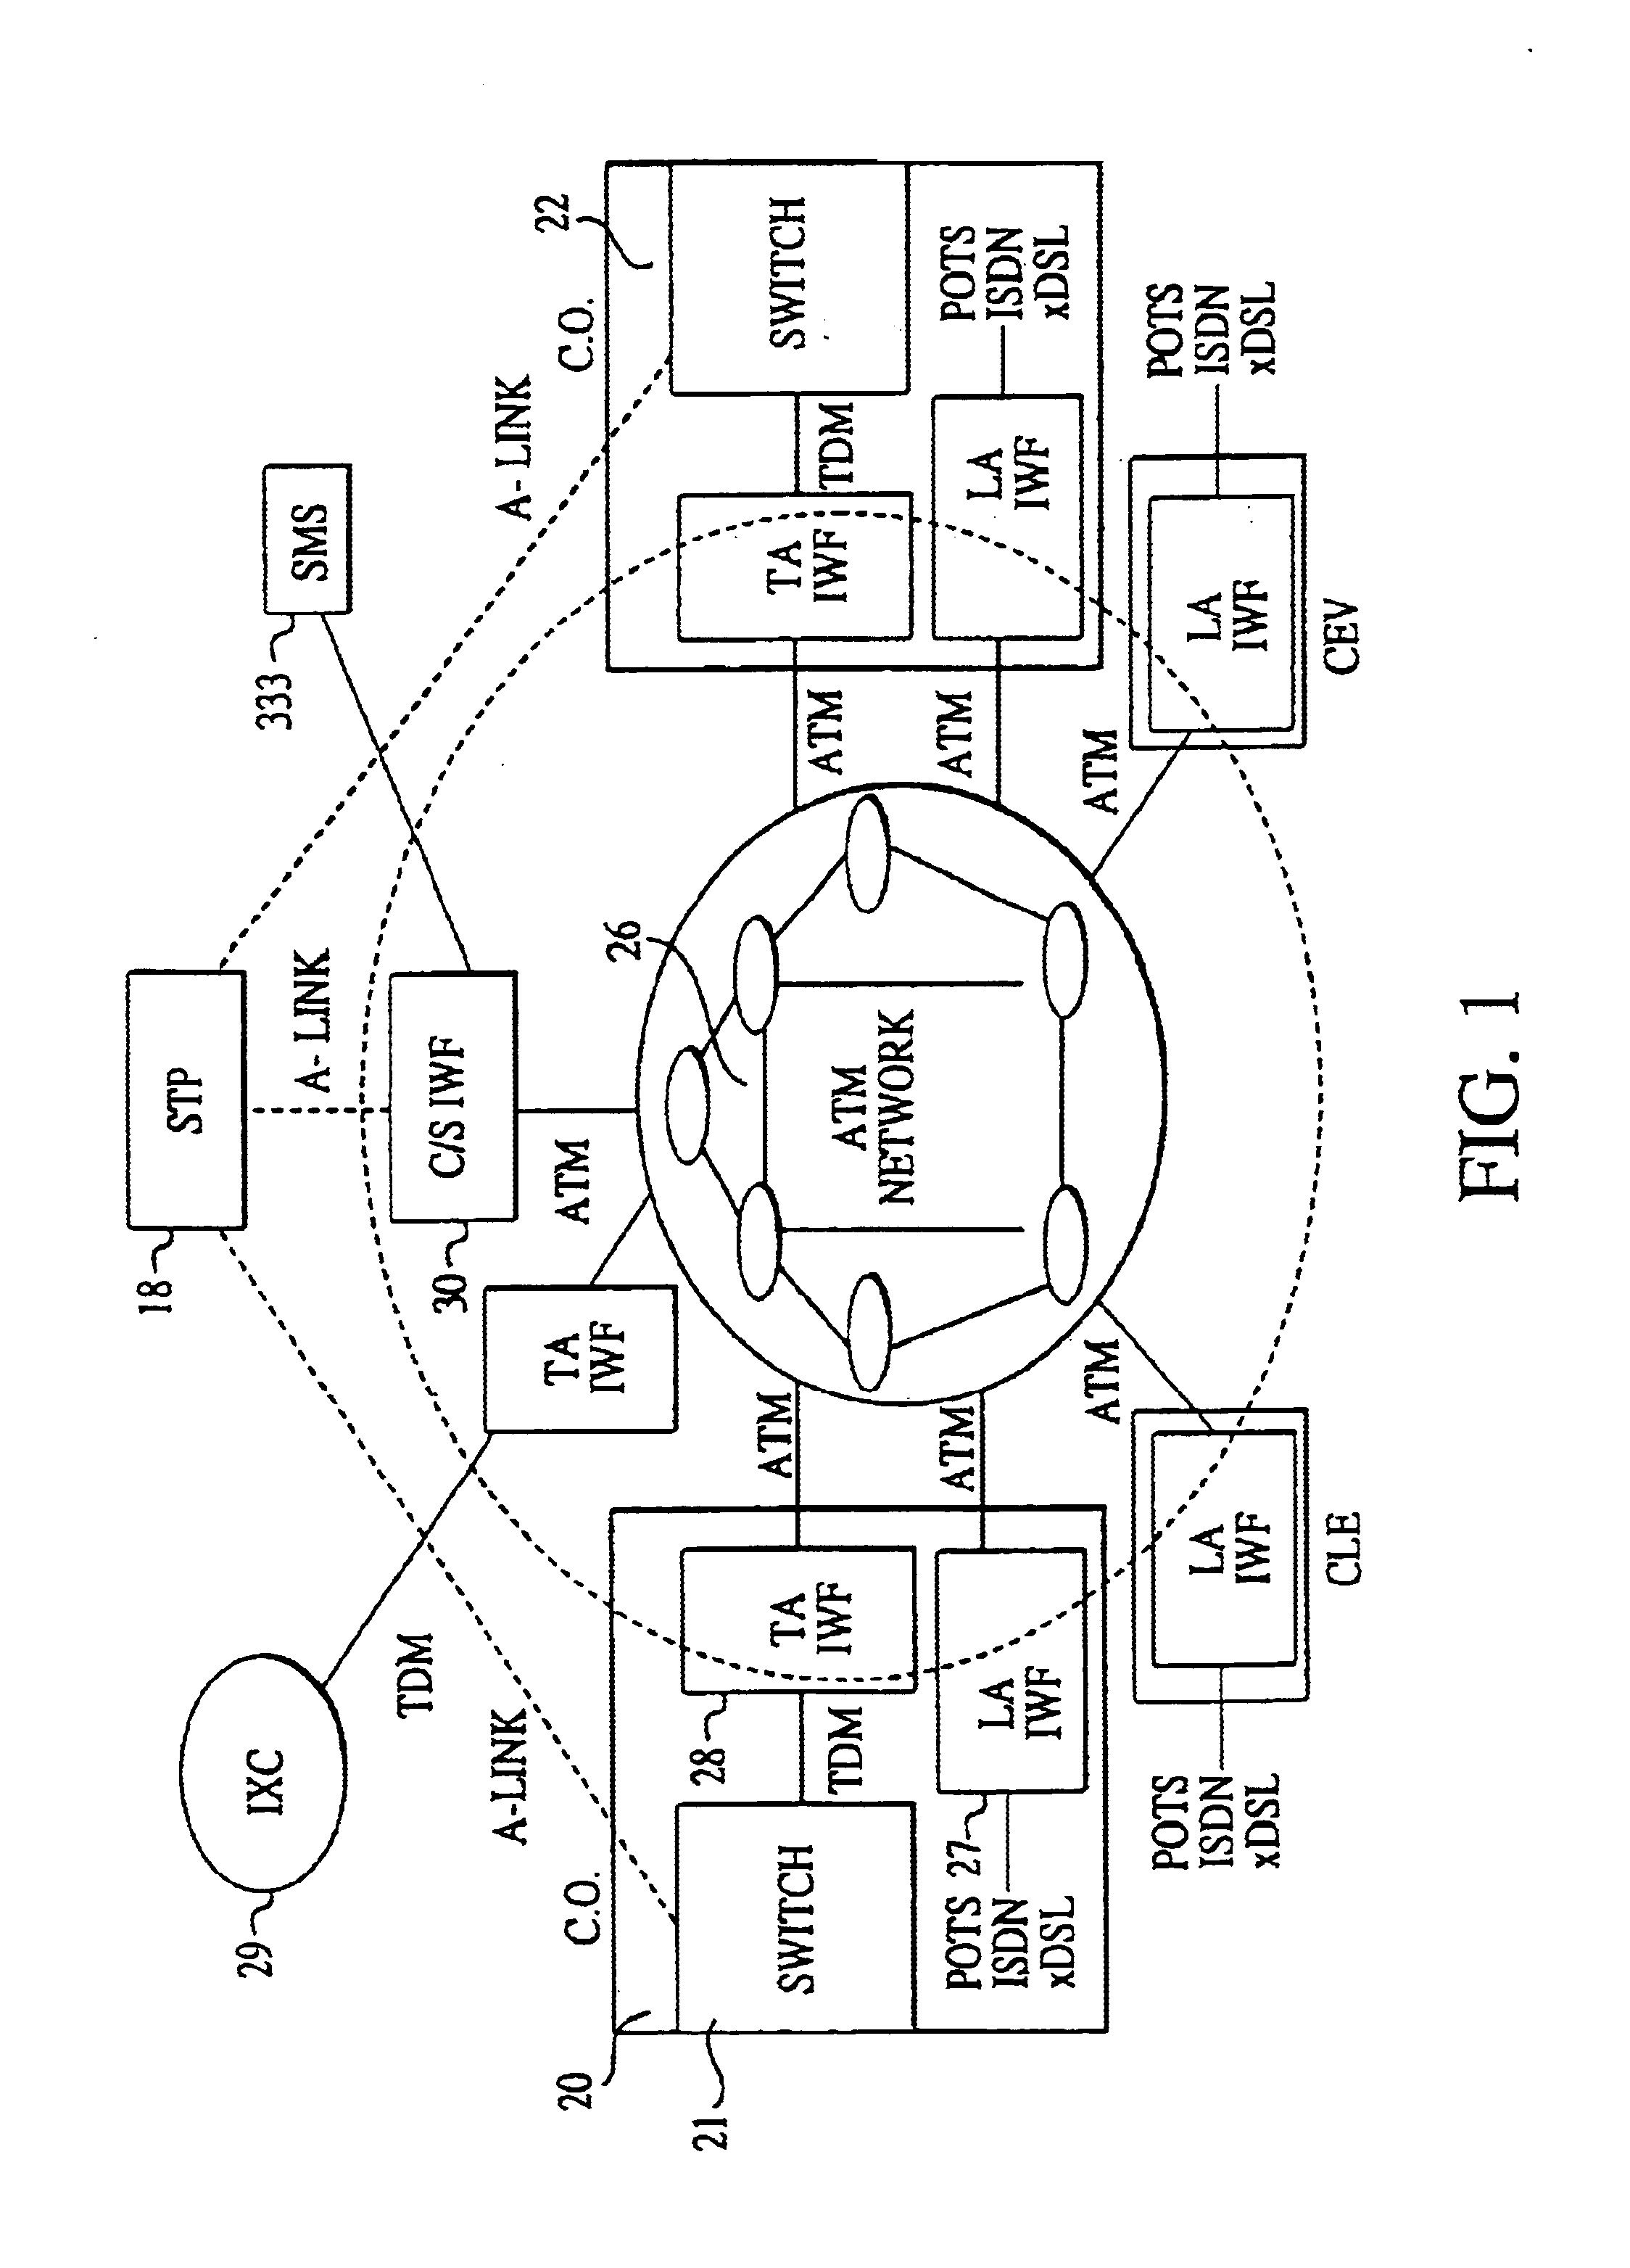 ATM-based distributed network switching system